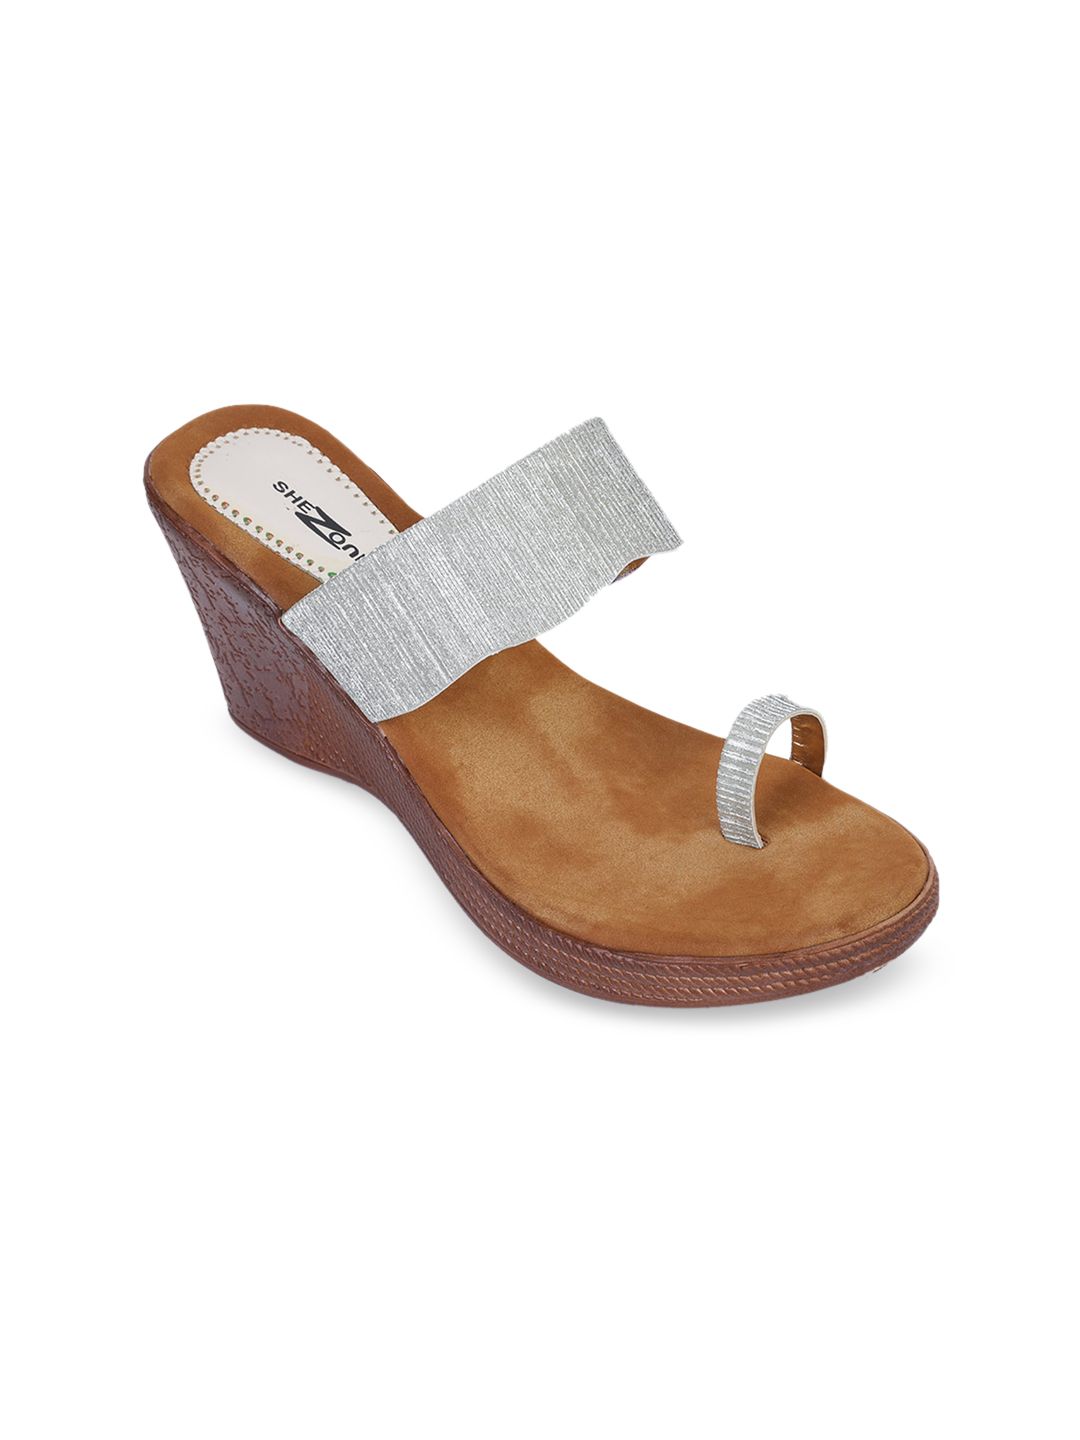 Shezone Women Silver-Toned Solid Wedges Price in India